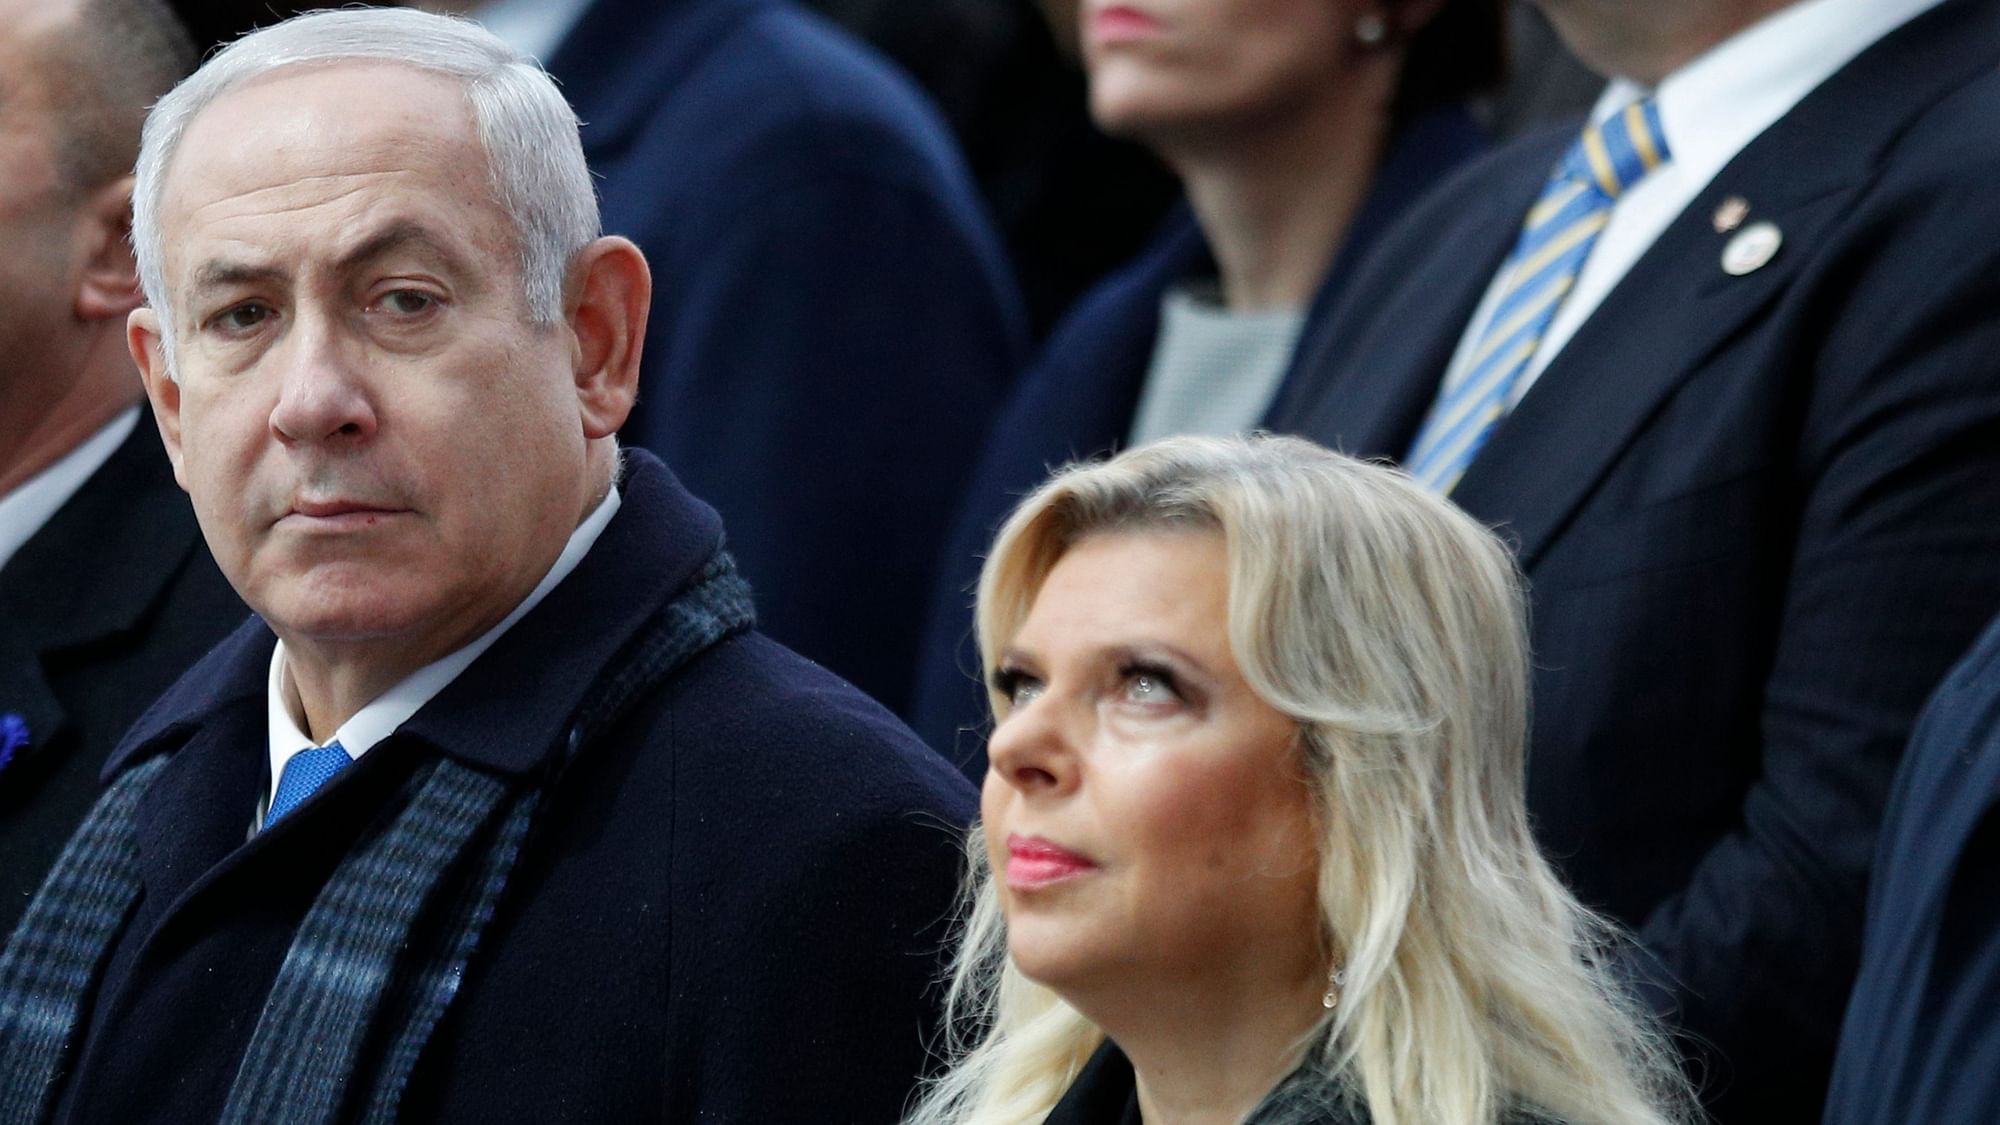 Israel PM Netanyahu’s Wife Convicted of Misusing Public Funds